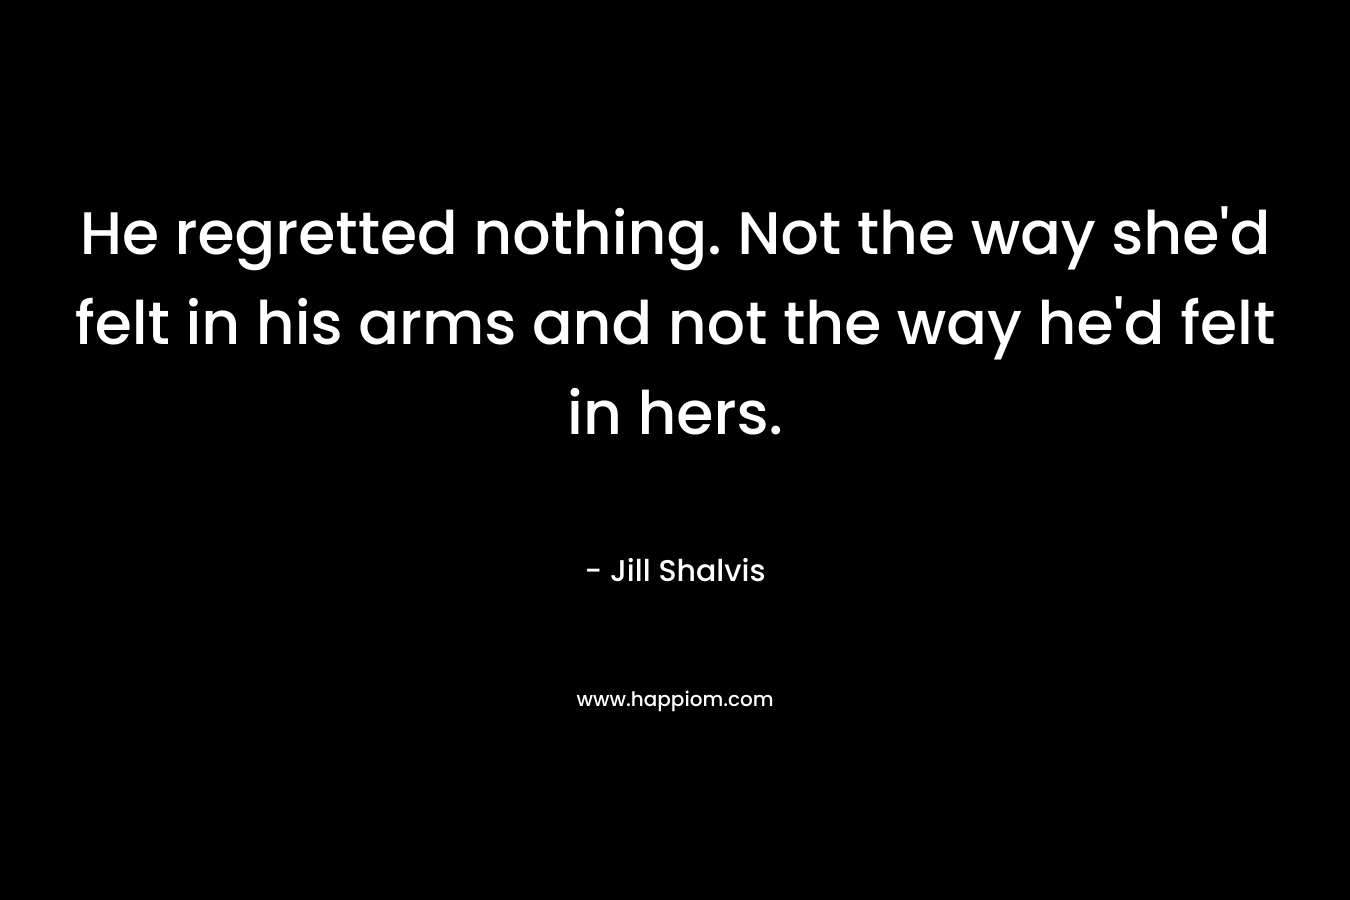 He regretted nothing. Not the way she'd felt in his arms and not the way he'd felt in hers.